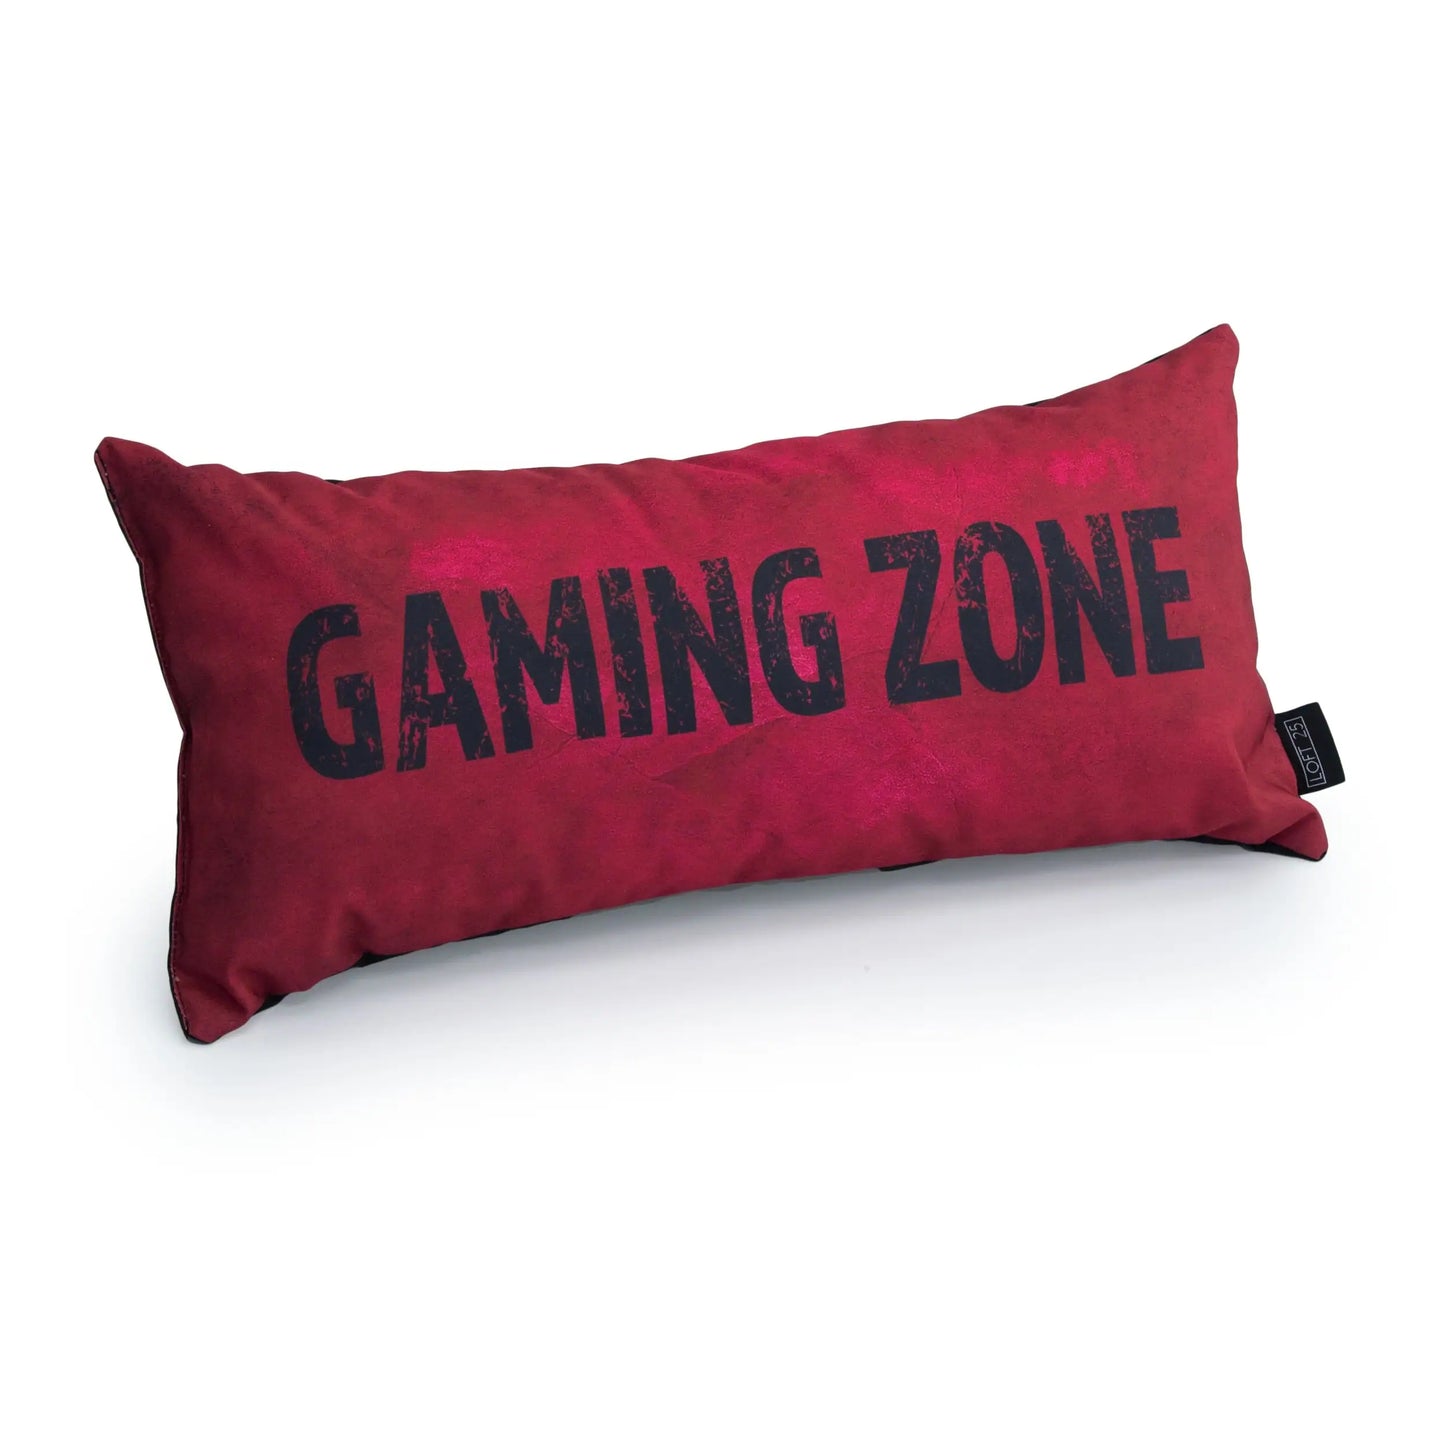 A red pillow with the words "GAMING ZONE" written on it in black.